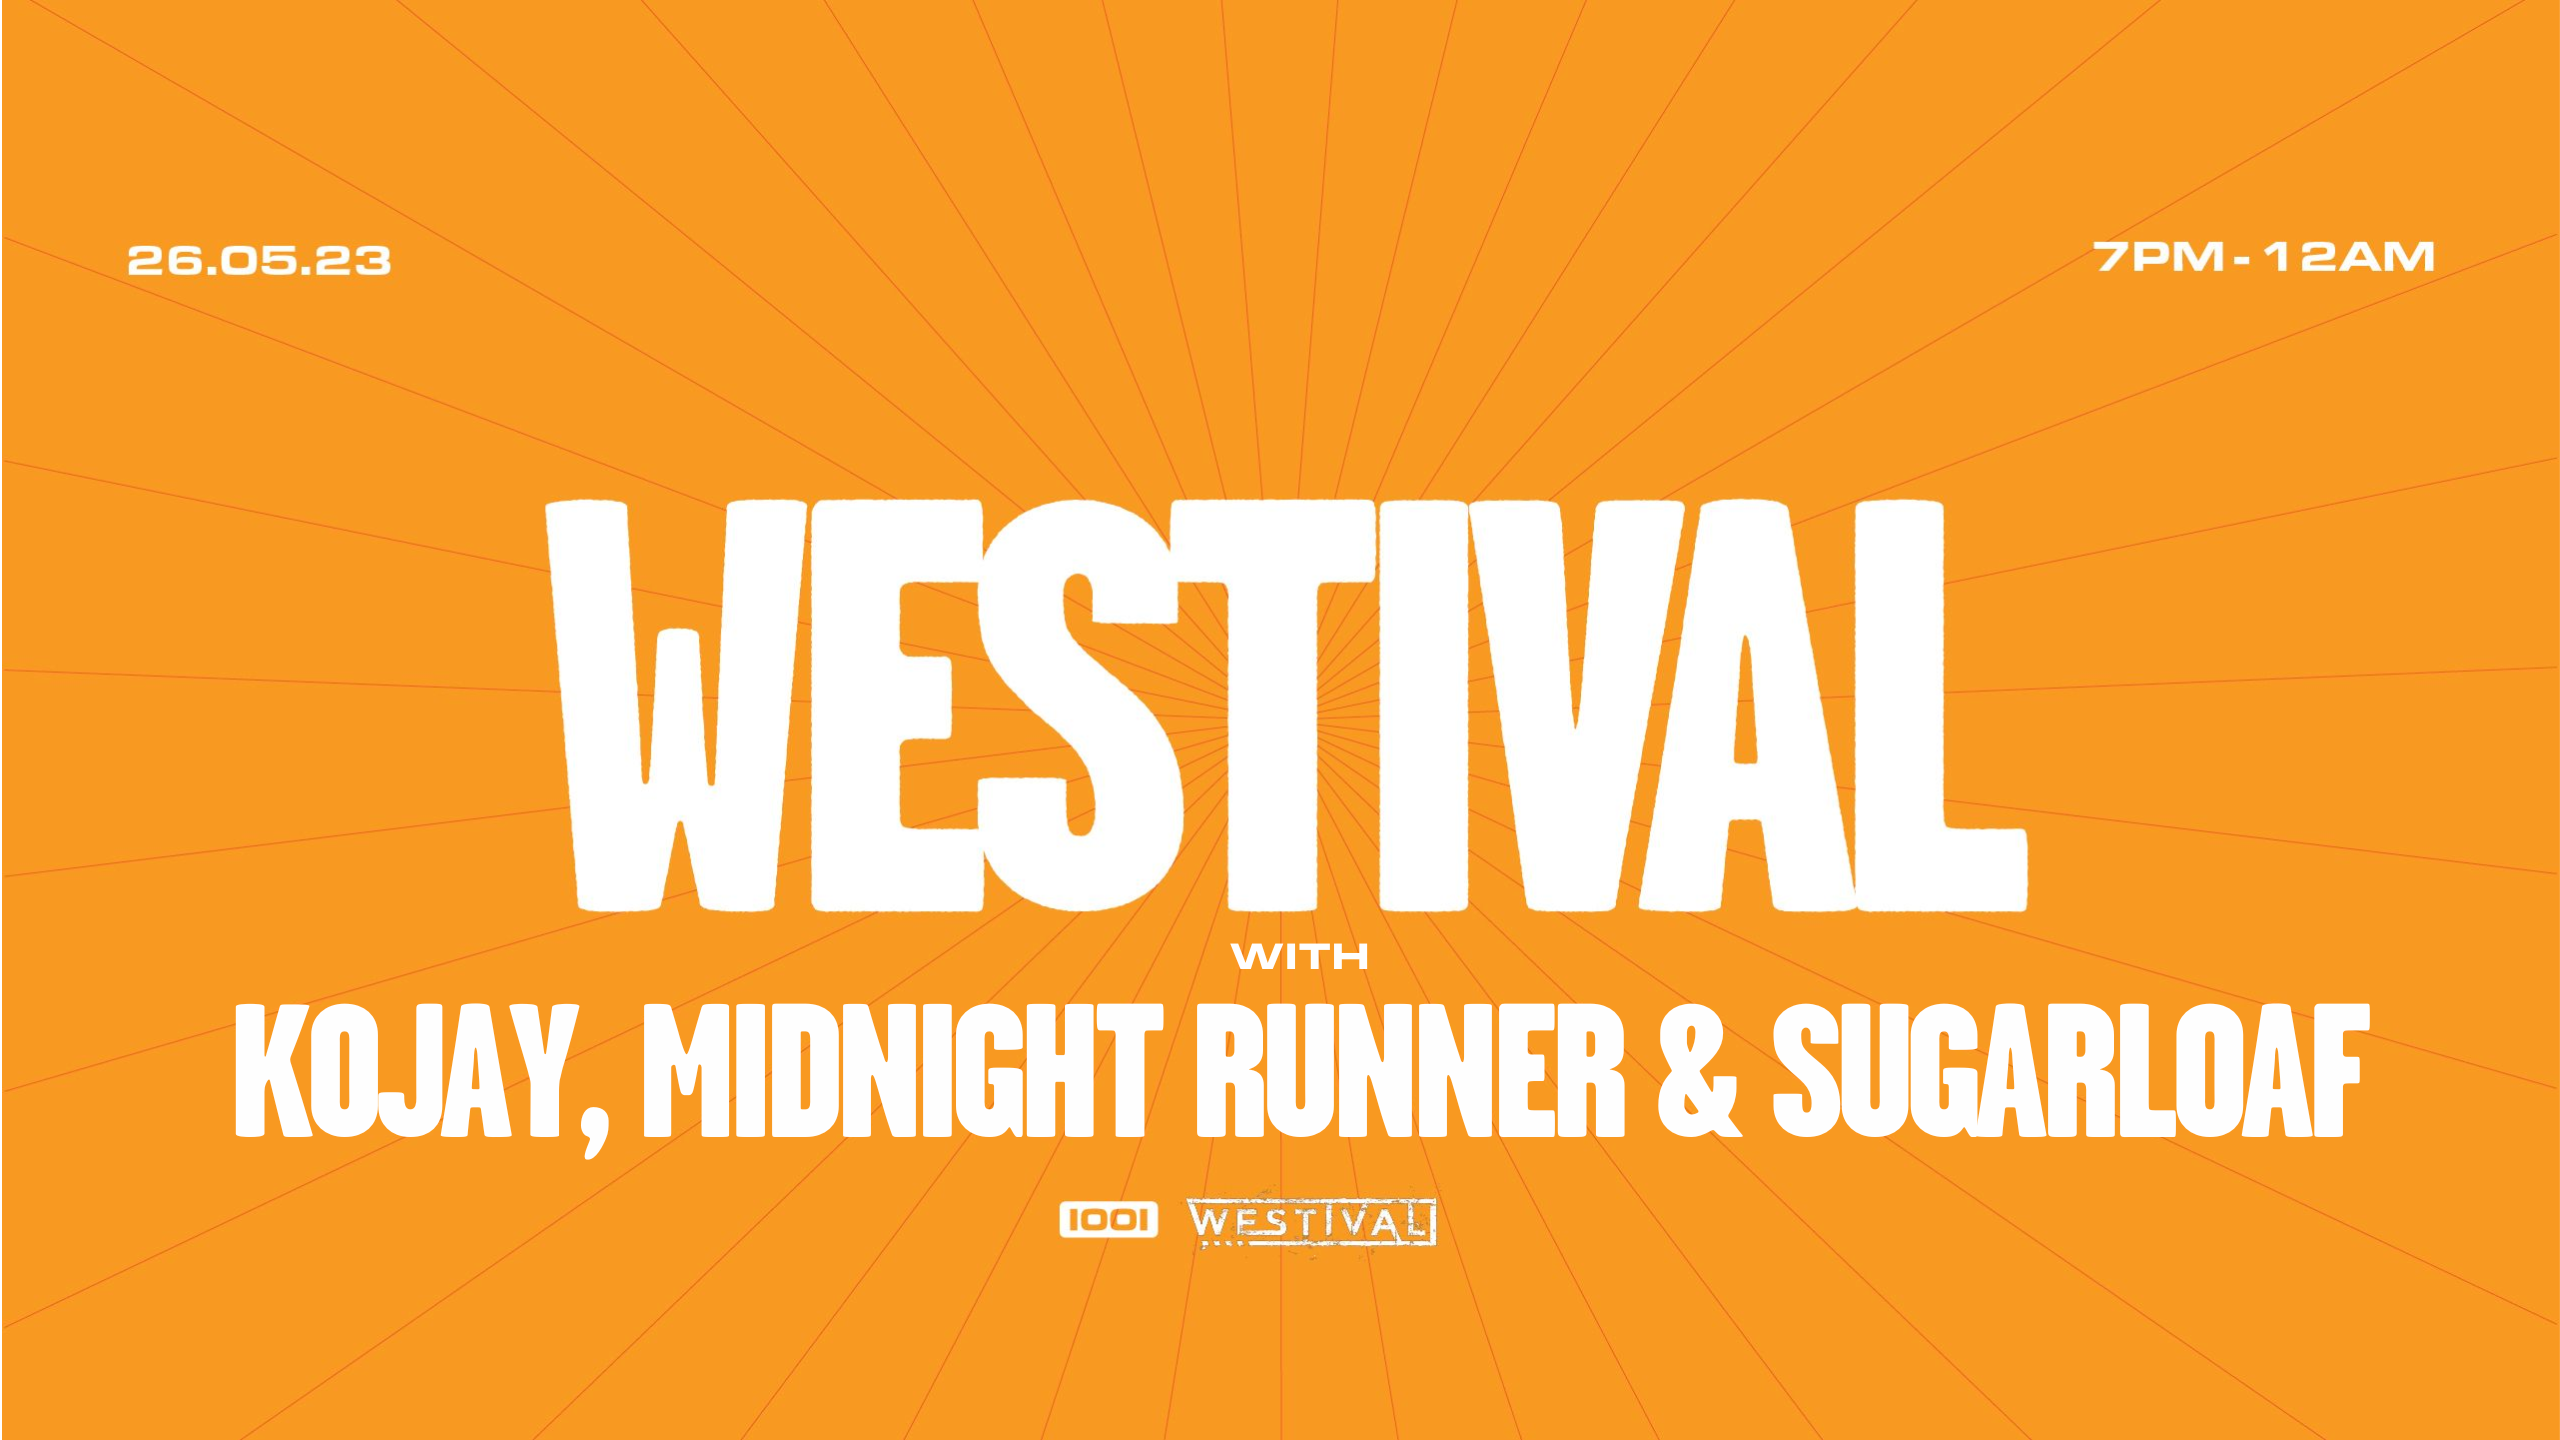 Westival Takeover with Kojay, Midnight Runner & SUGARLOAF - Página frontal